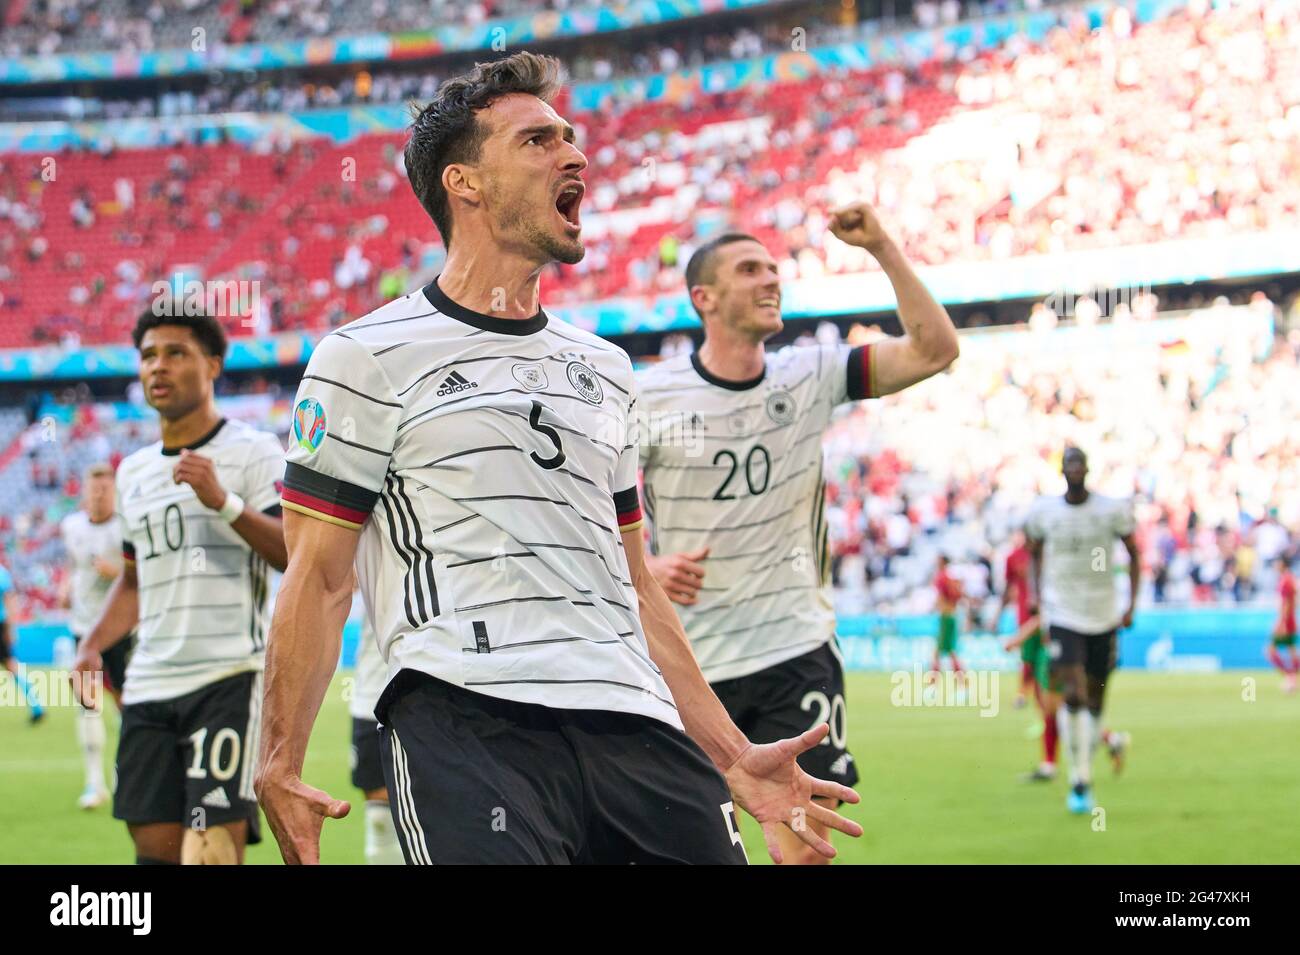 Mats Hummels, DFB 5 jubel when  Serge Gnabry, DFB 10   scores, shoots goal , Tor, Treffer,,, 1-2 jubel, celebrates his goal, happy, laugh, celebration,  in the Group F match PORTUGAL - GERMANY  at the football UEFA European Championships 2020 in Season 2020/2021 on June 19, 2021  in Munich, Germany. © Peter Schatz / Alamy Live News Stock Photo